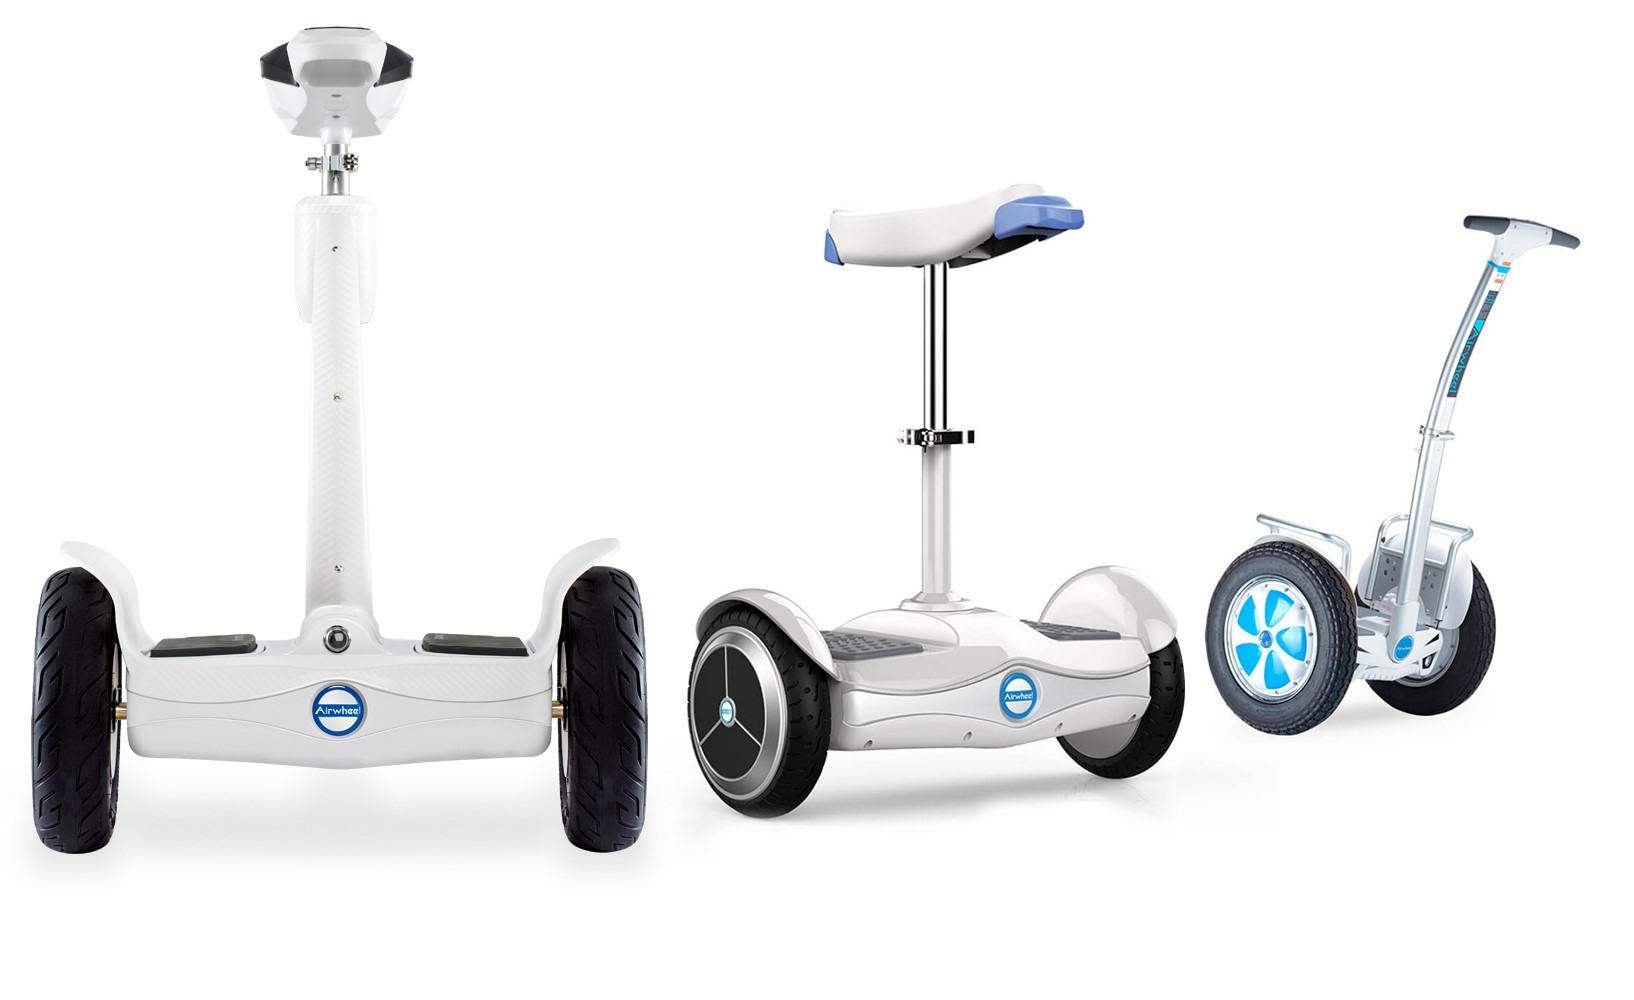 Airwheel A3 sitting-posture electric scooter